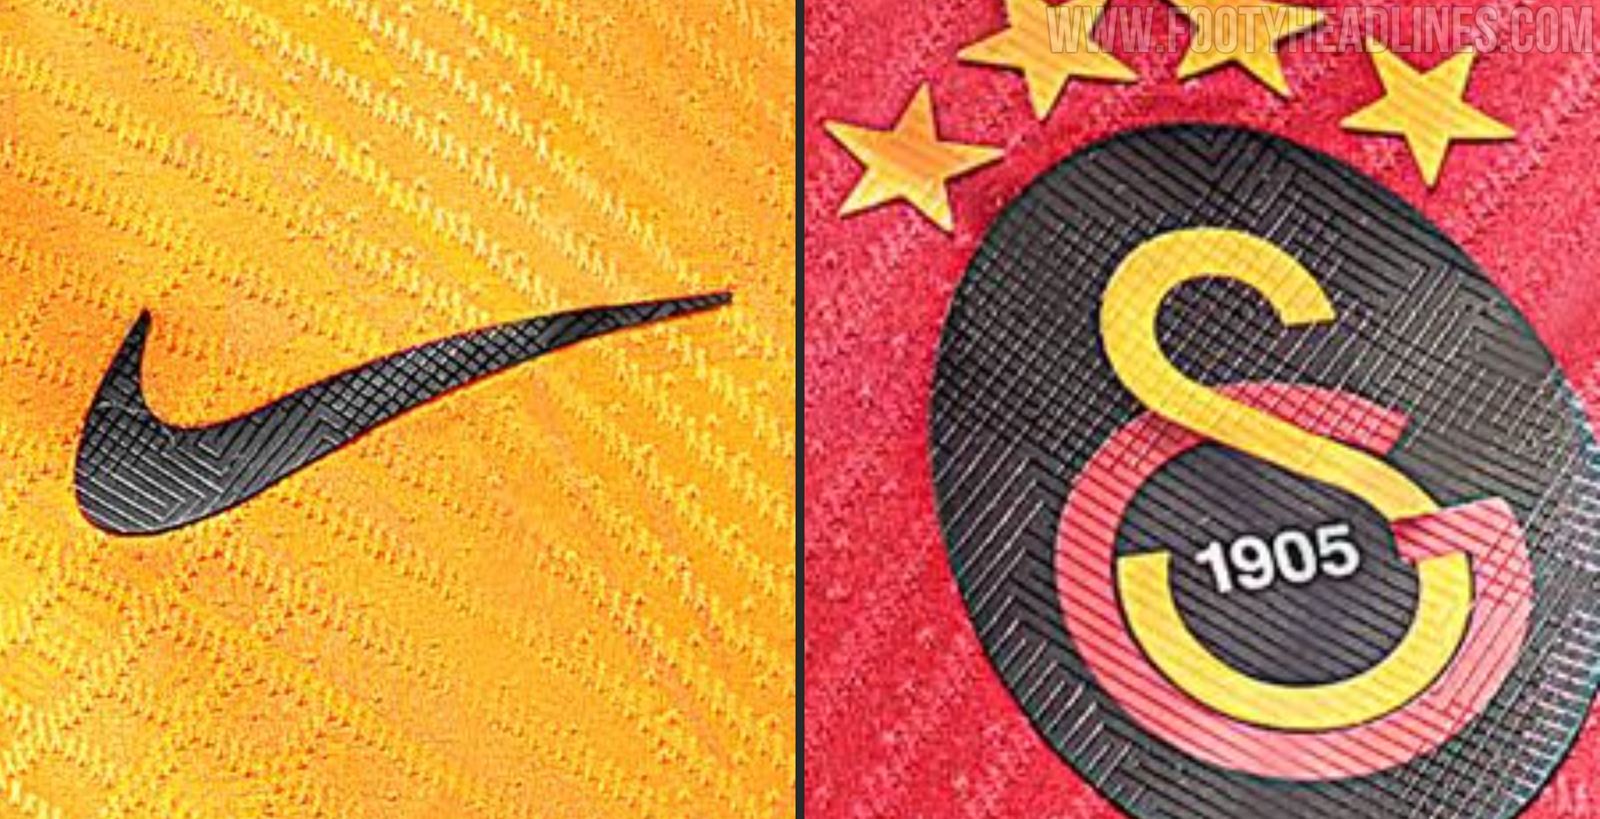 LEAKED: Nike To Replace Vaporknit For All-New 'Dri-FIT ADV' Authentic  Technology - Footy Headlines